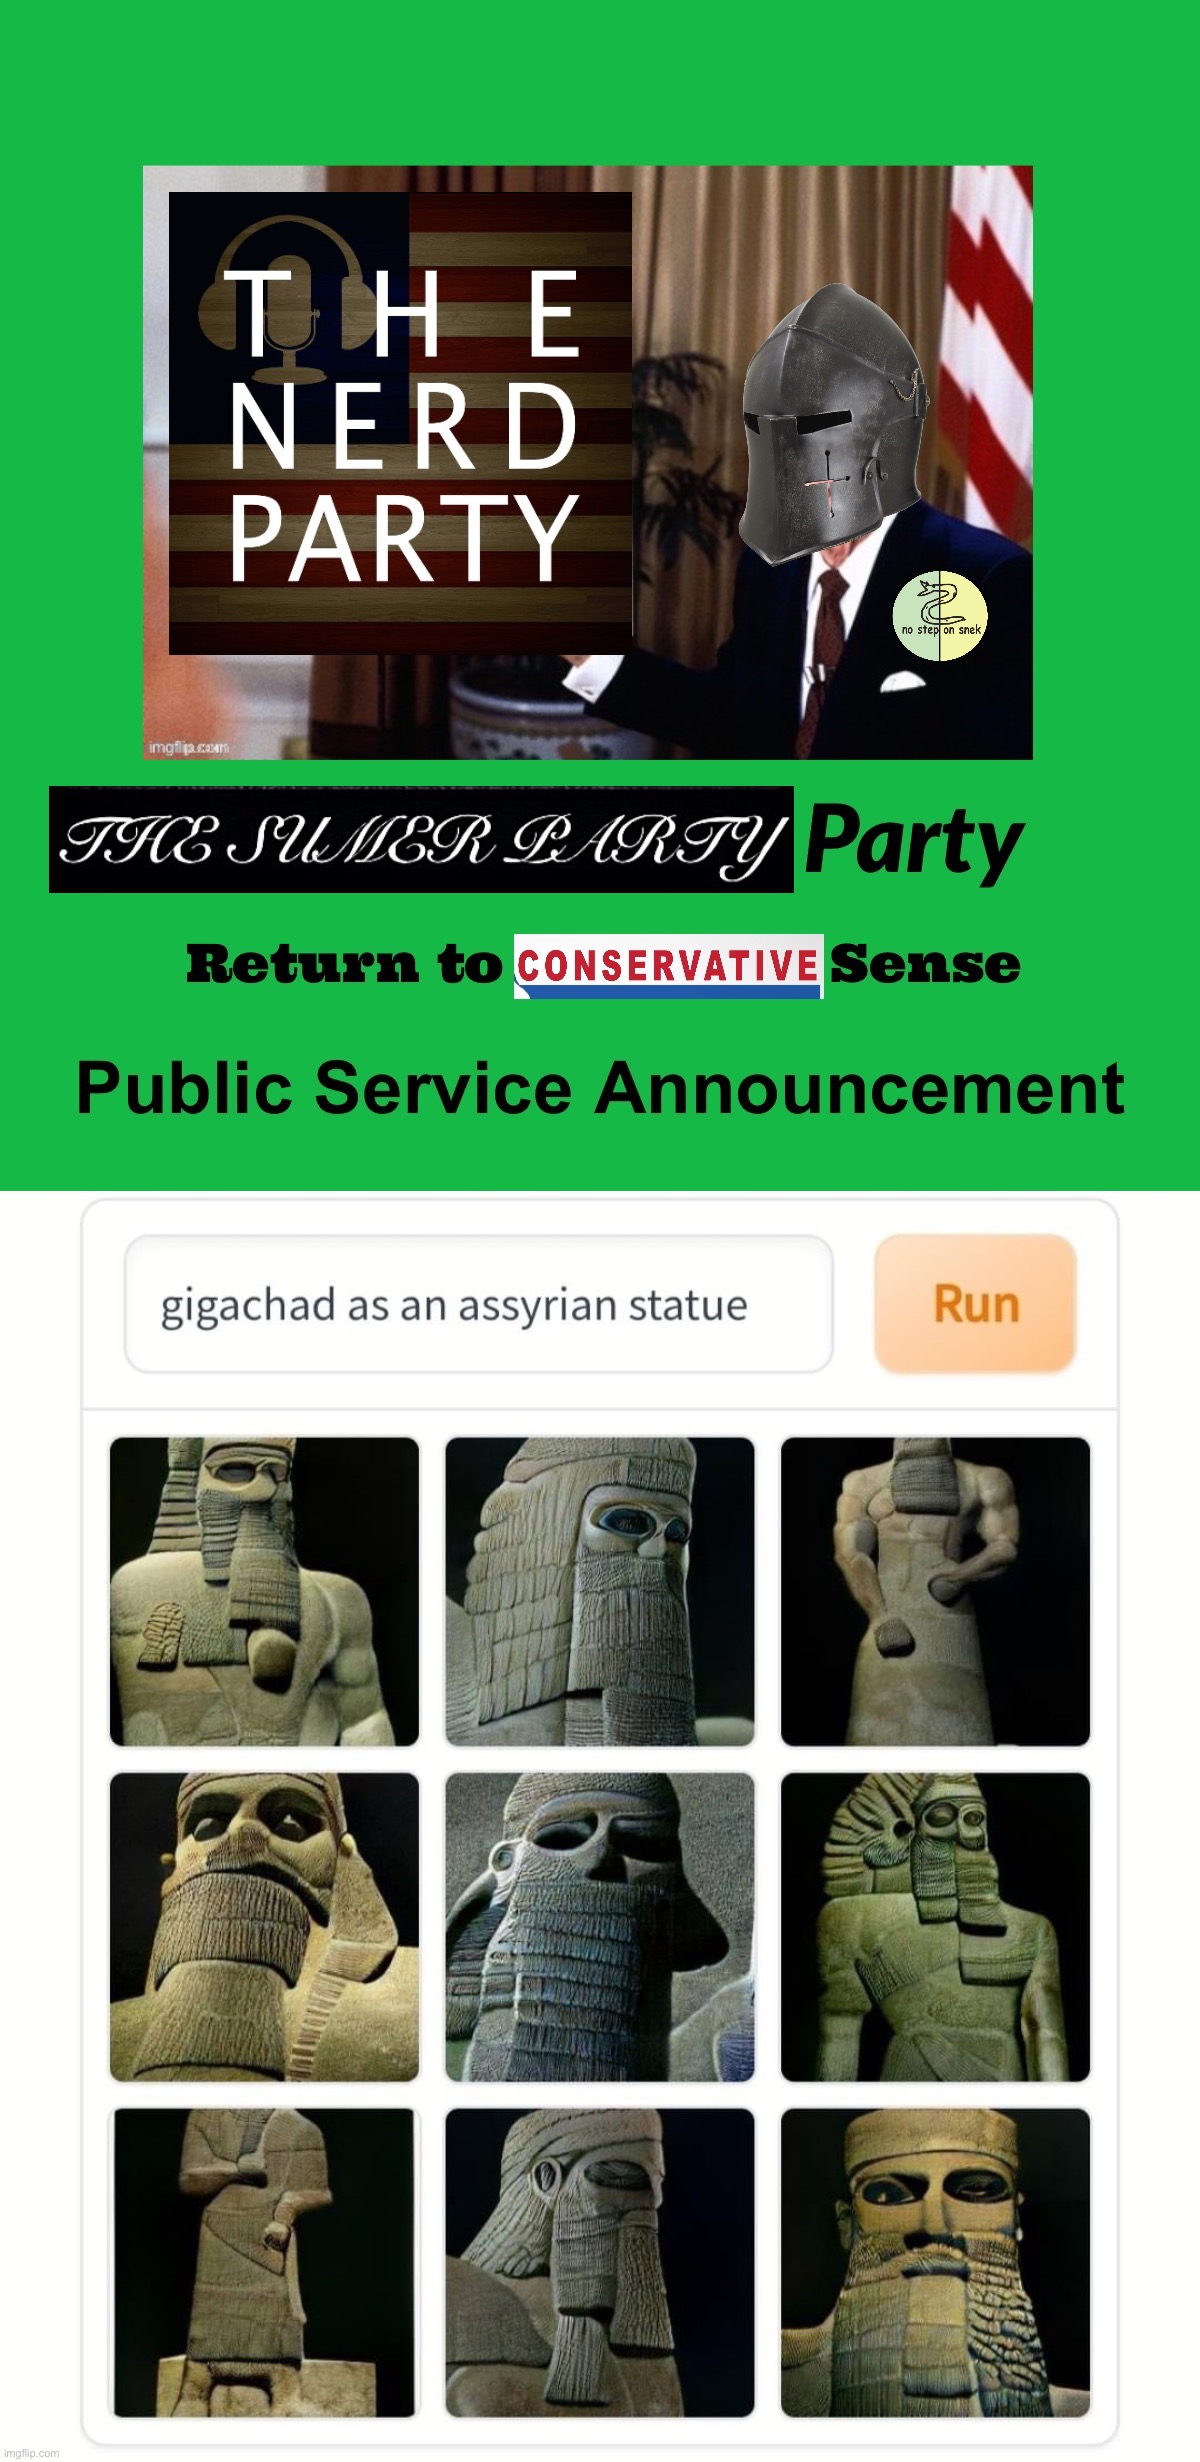 Well boys we did it, we manufactured the perfect IMGFLIP_PRESIDENTS campaign ad. There are no more after this sorry | image tagged in conservative party psa,gigachad as an assyrian statue,p,s,a,boi | made w/ Imgflip meme maker